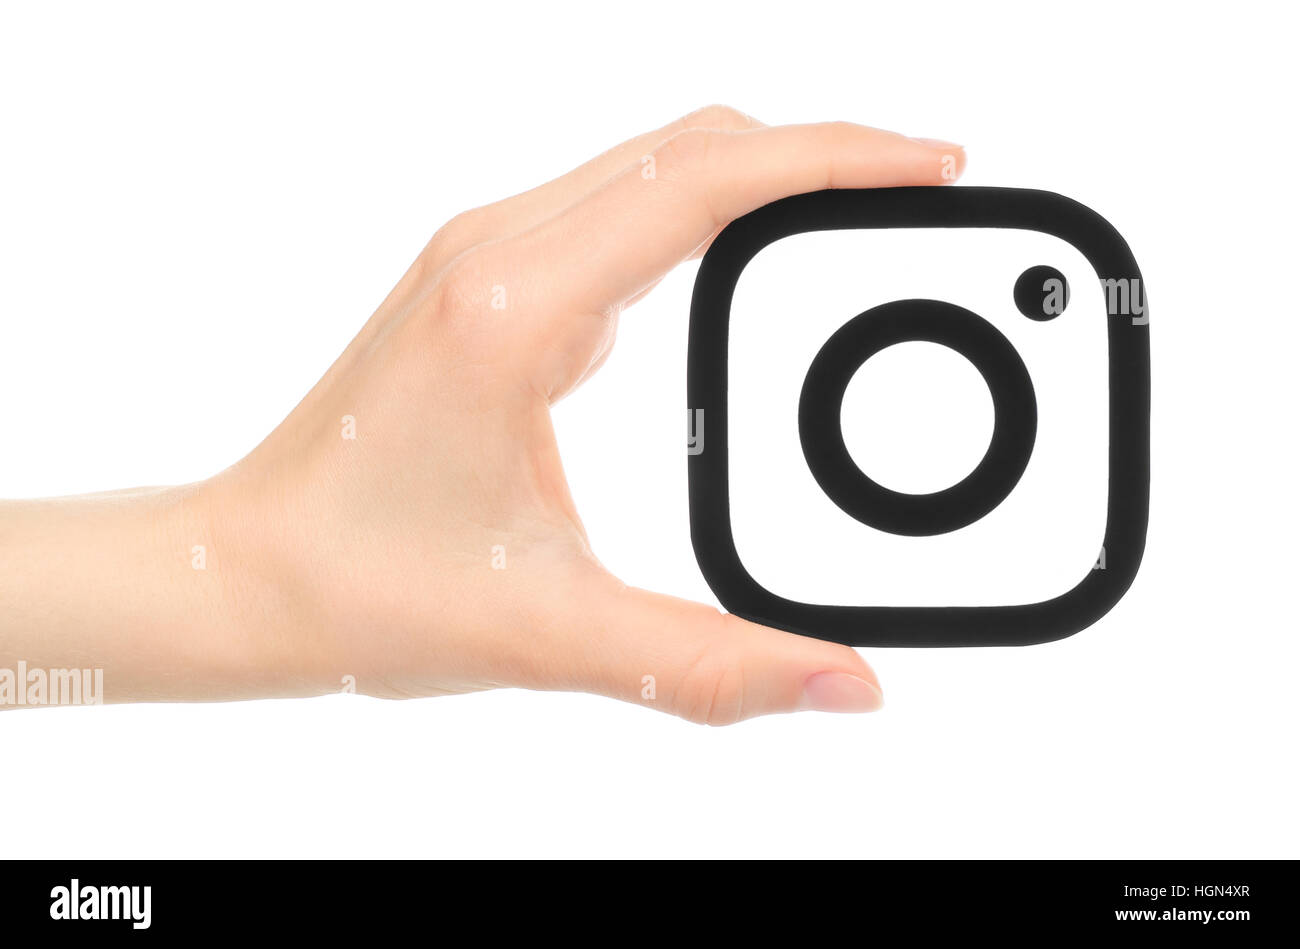 Kiev, Ukraine - May 17, 2016: Hand holds new Instagram logo printed on paper, on white background. Instagram is an online mobile photo-sharing, video- Stock Photo